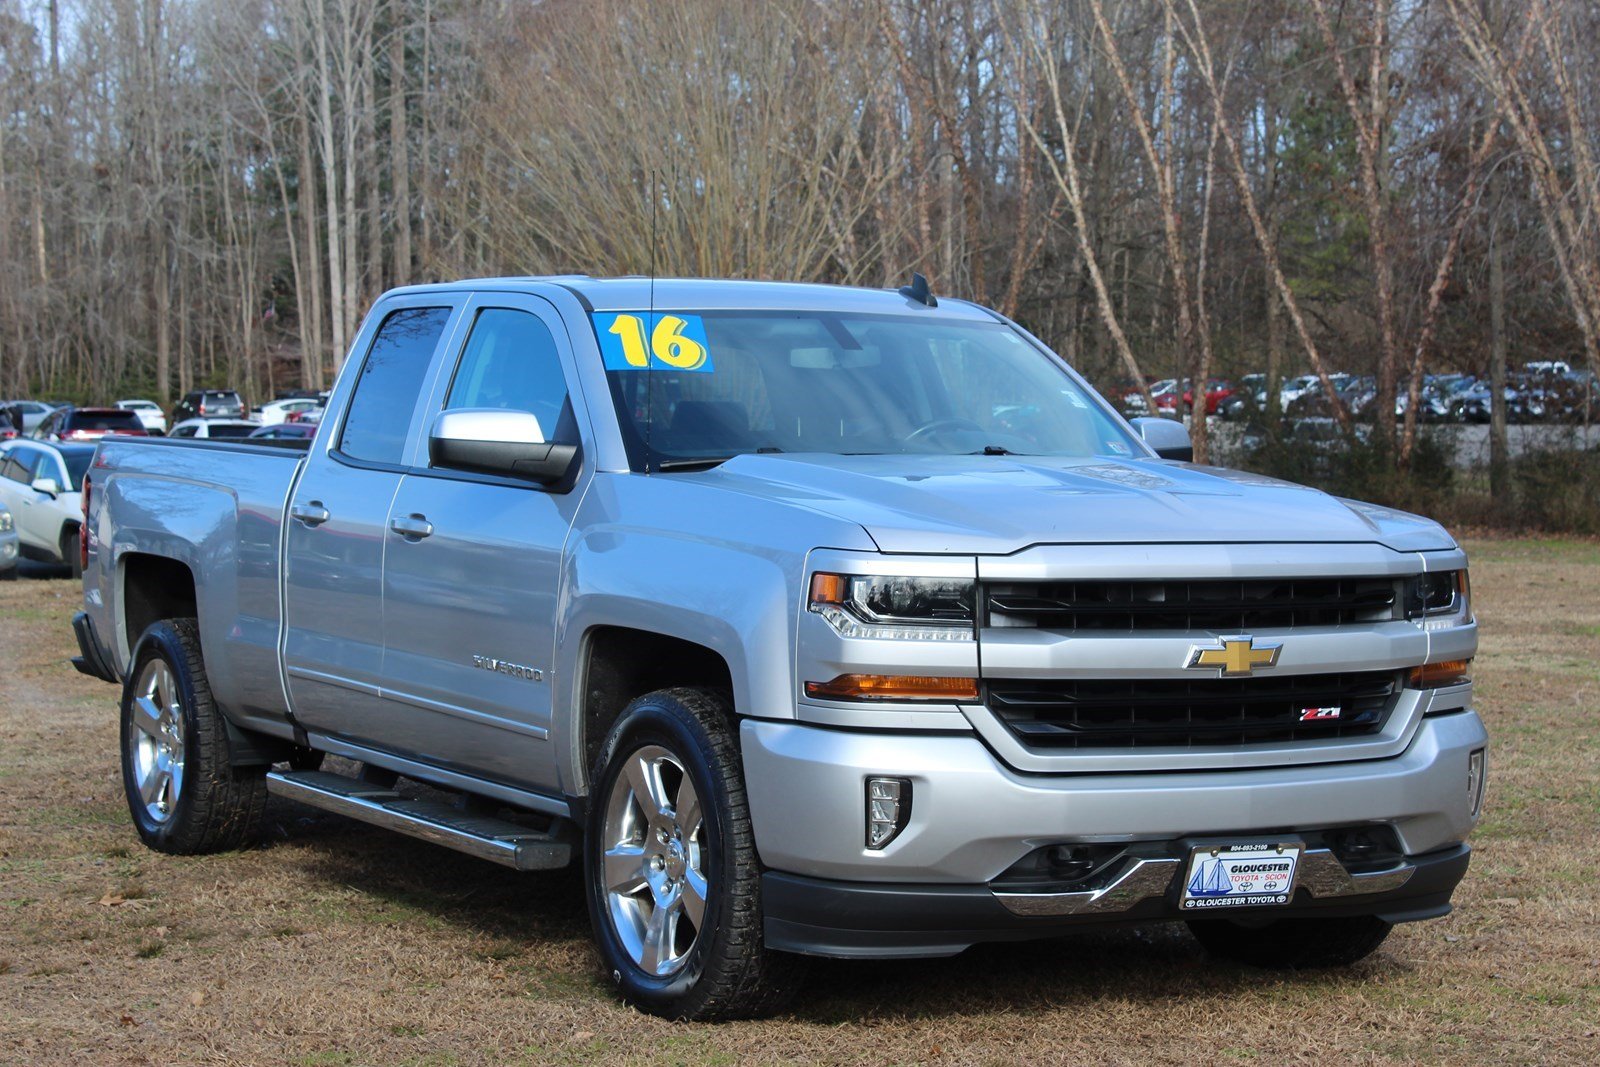 Pre-Owned 2016 Chevrolet Silverado 1500 z71 Off Road LT Extended Cab ...